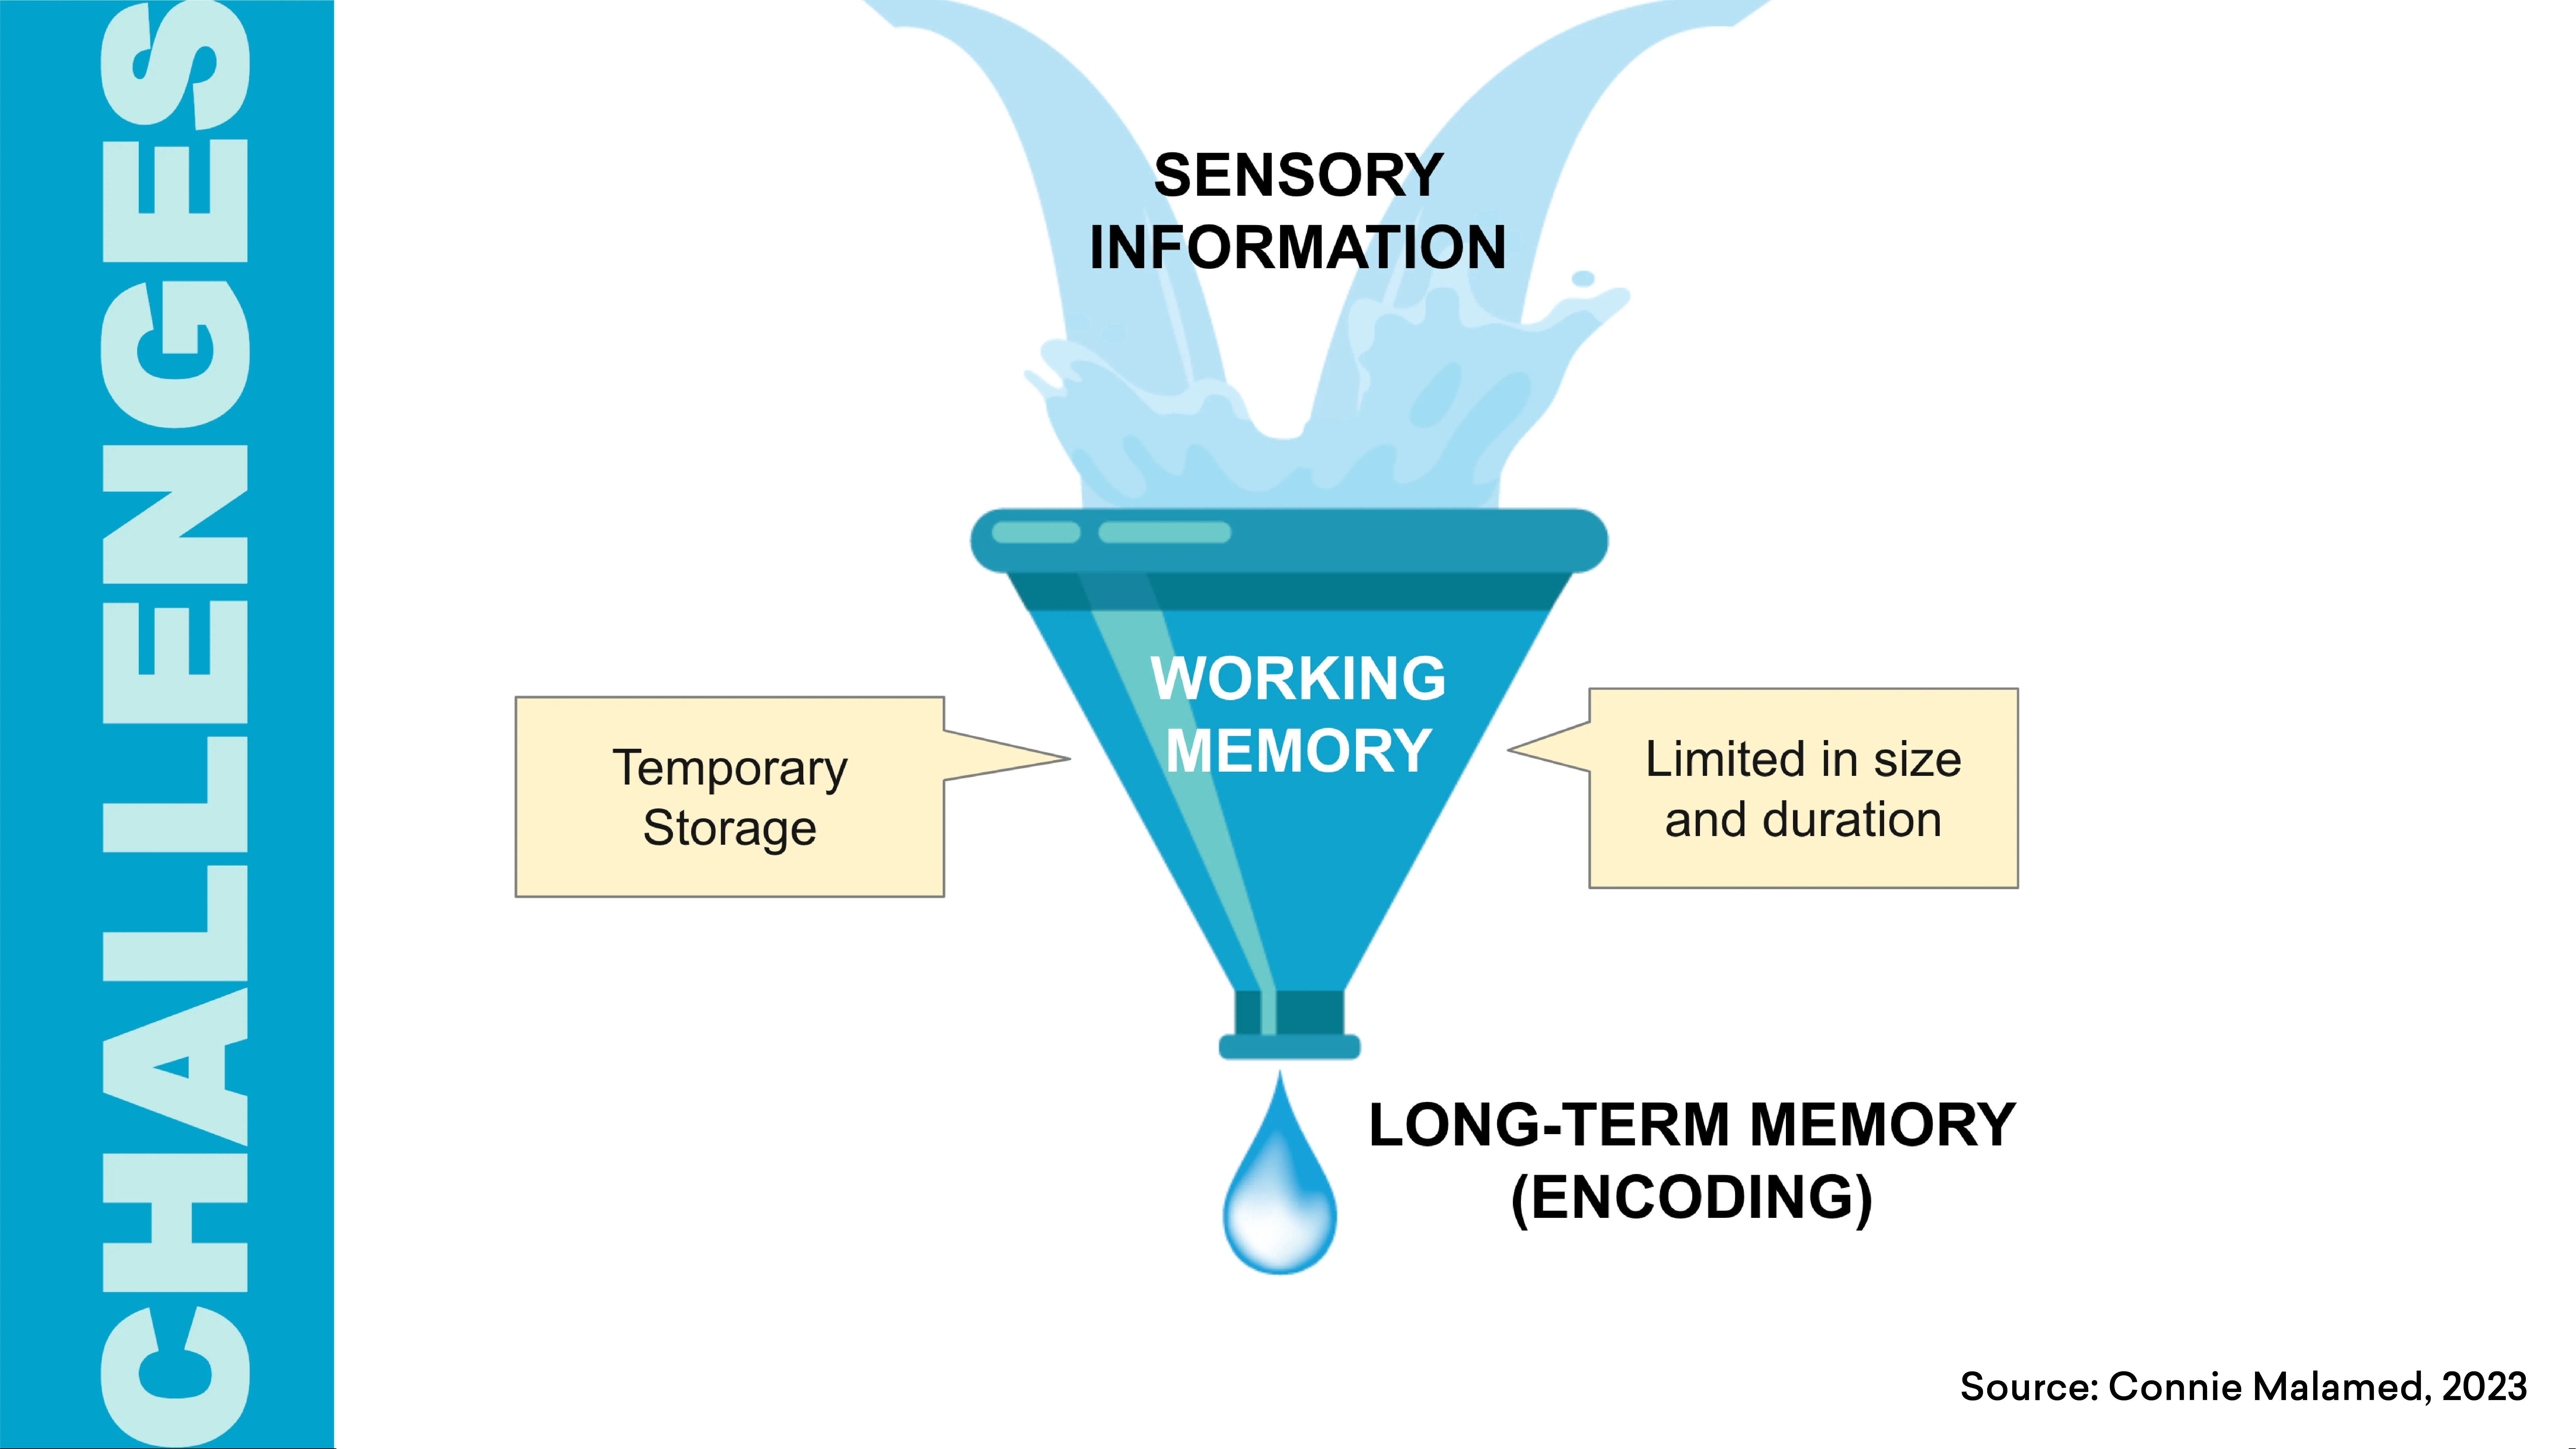 The image aims to explain how information overload, working memory, and long-term memory intertwine.